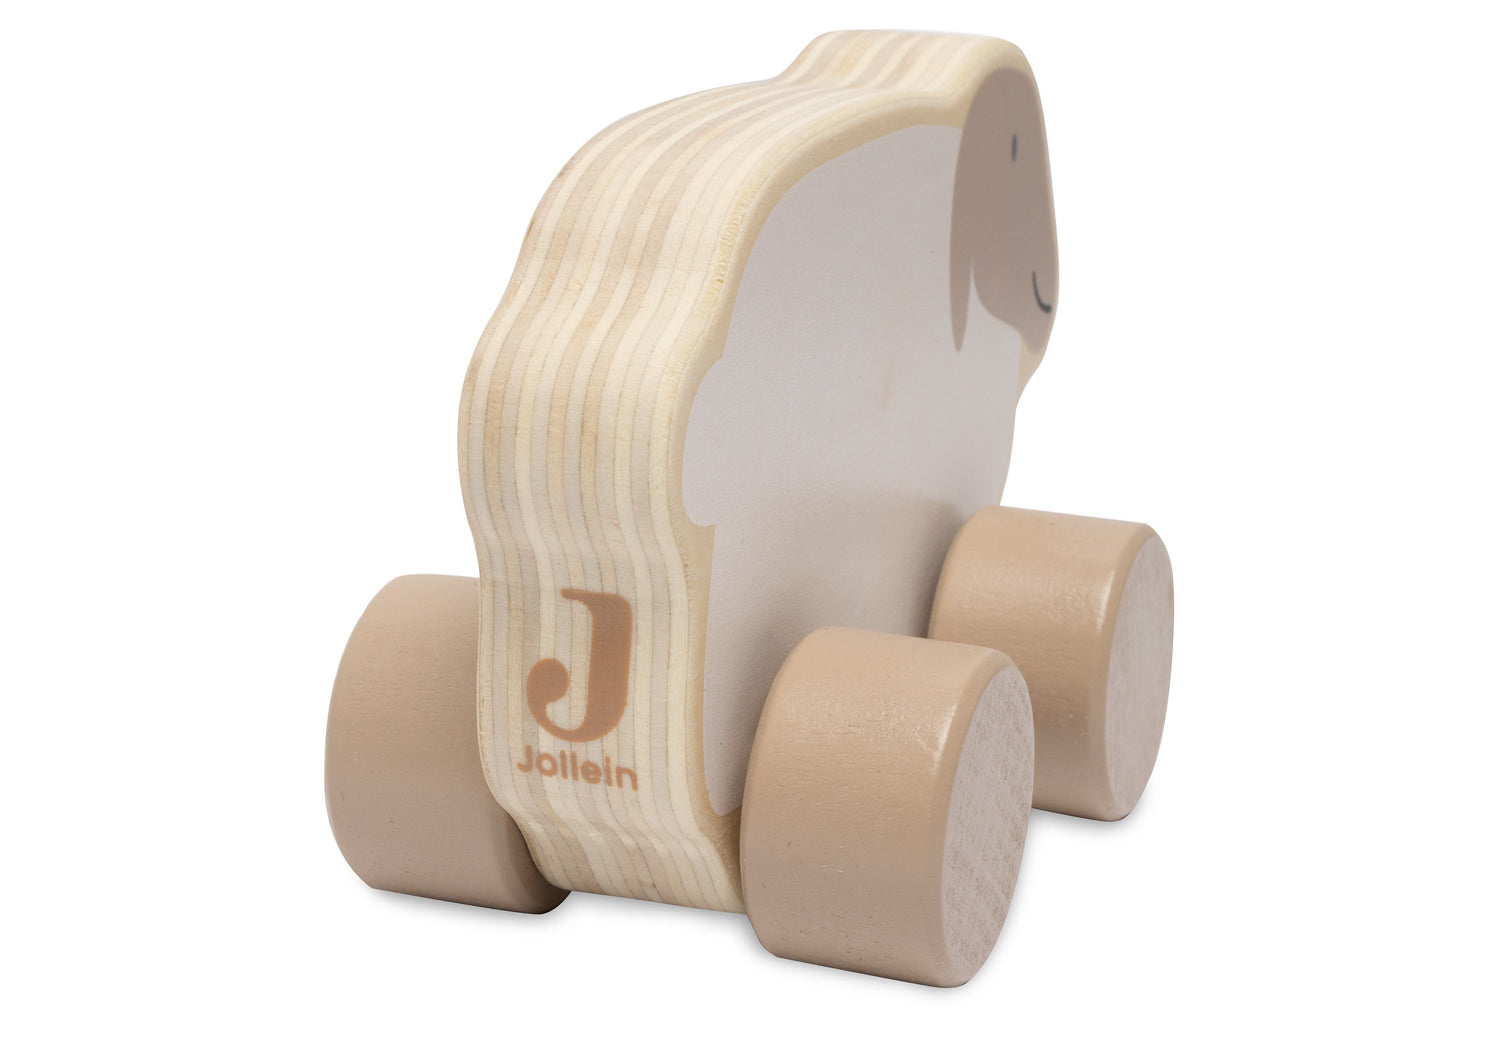 Jollein wooden toy car lamb from behind